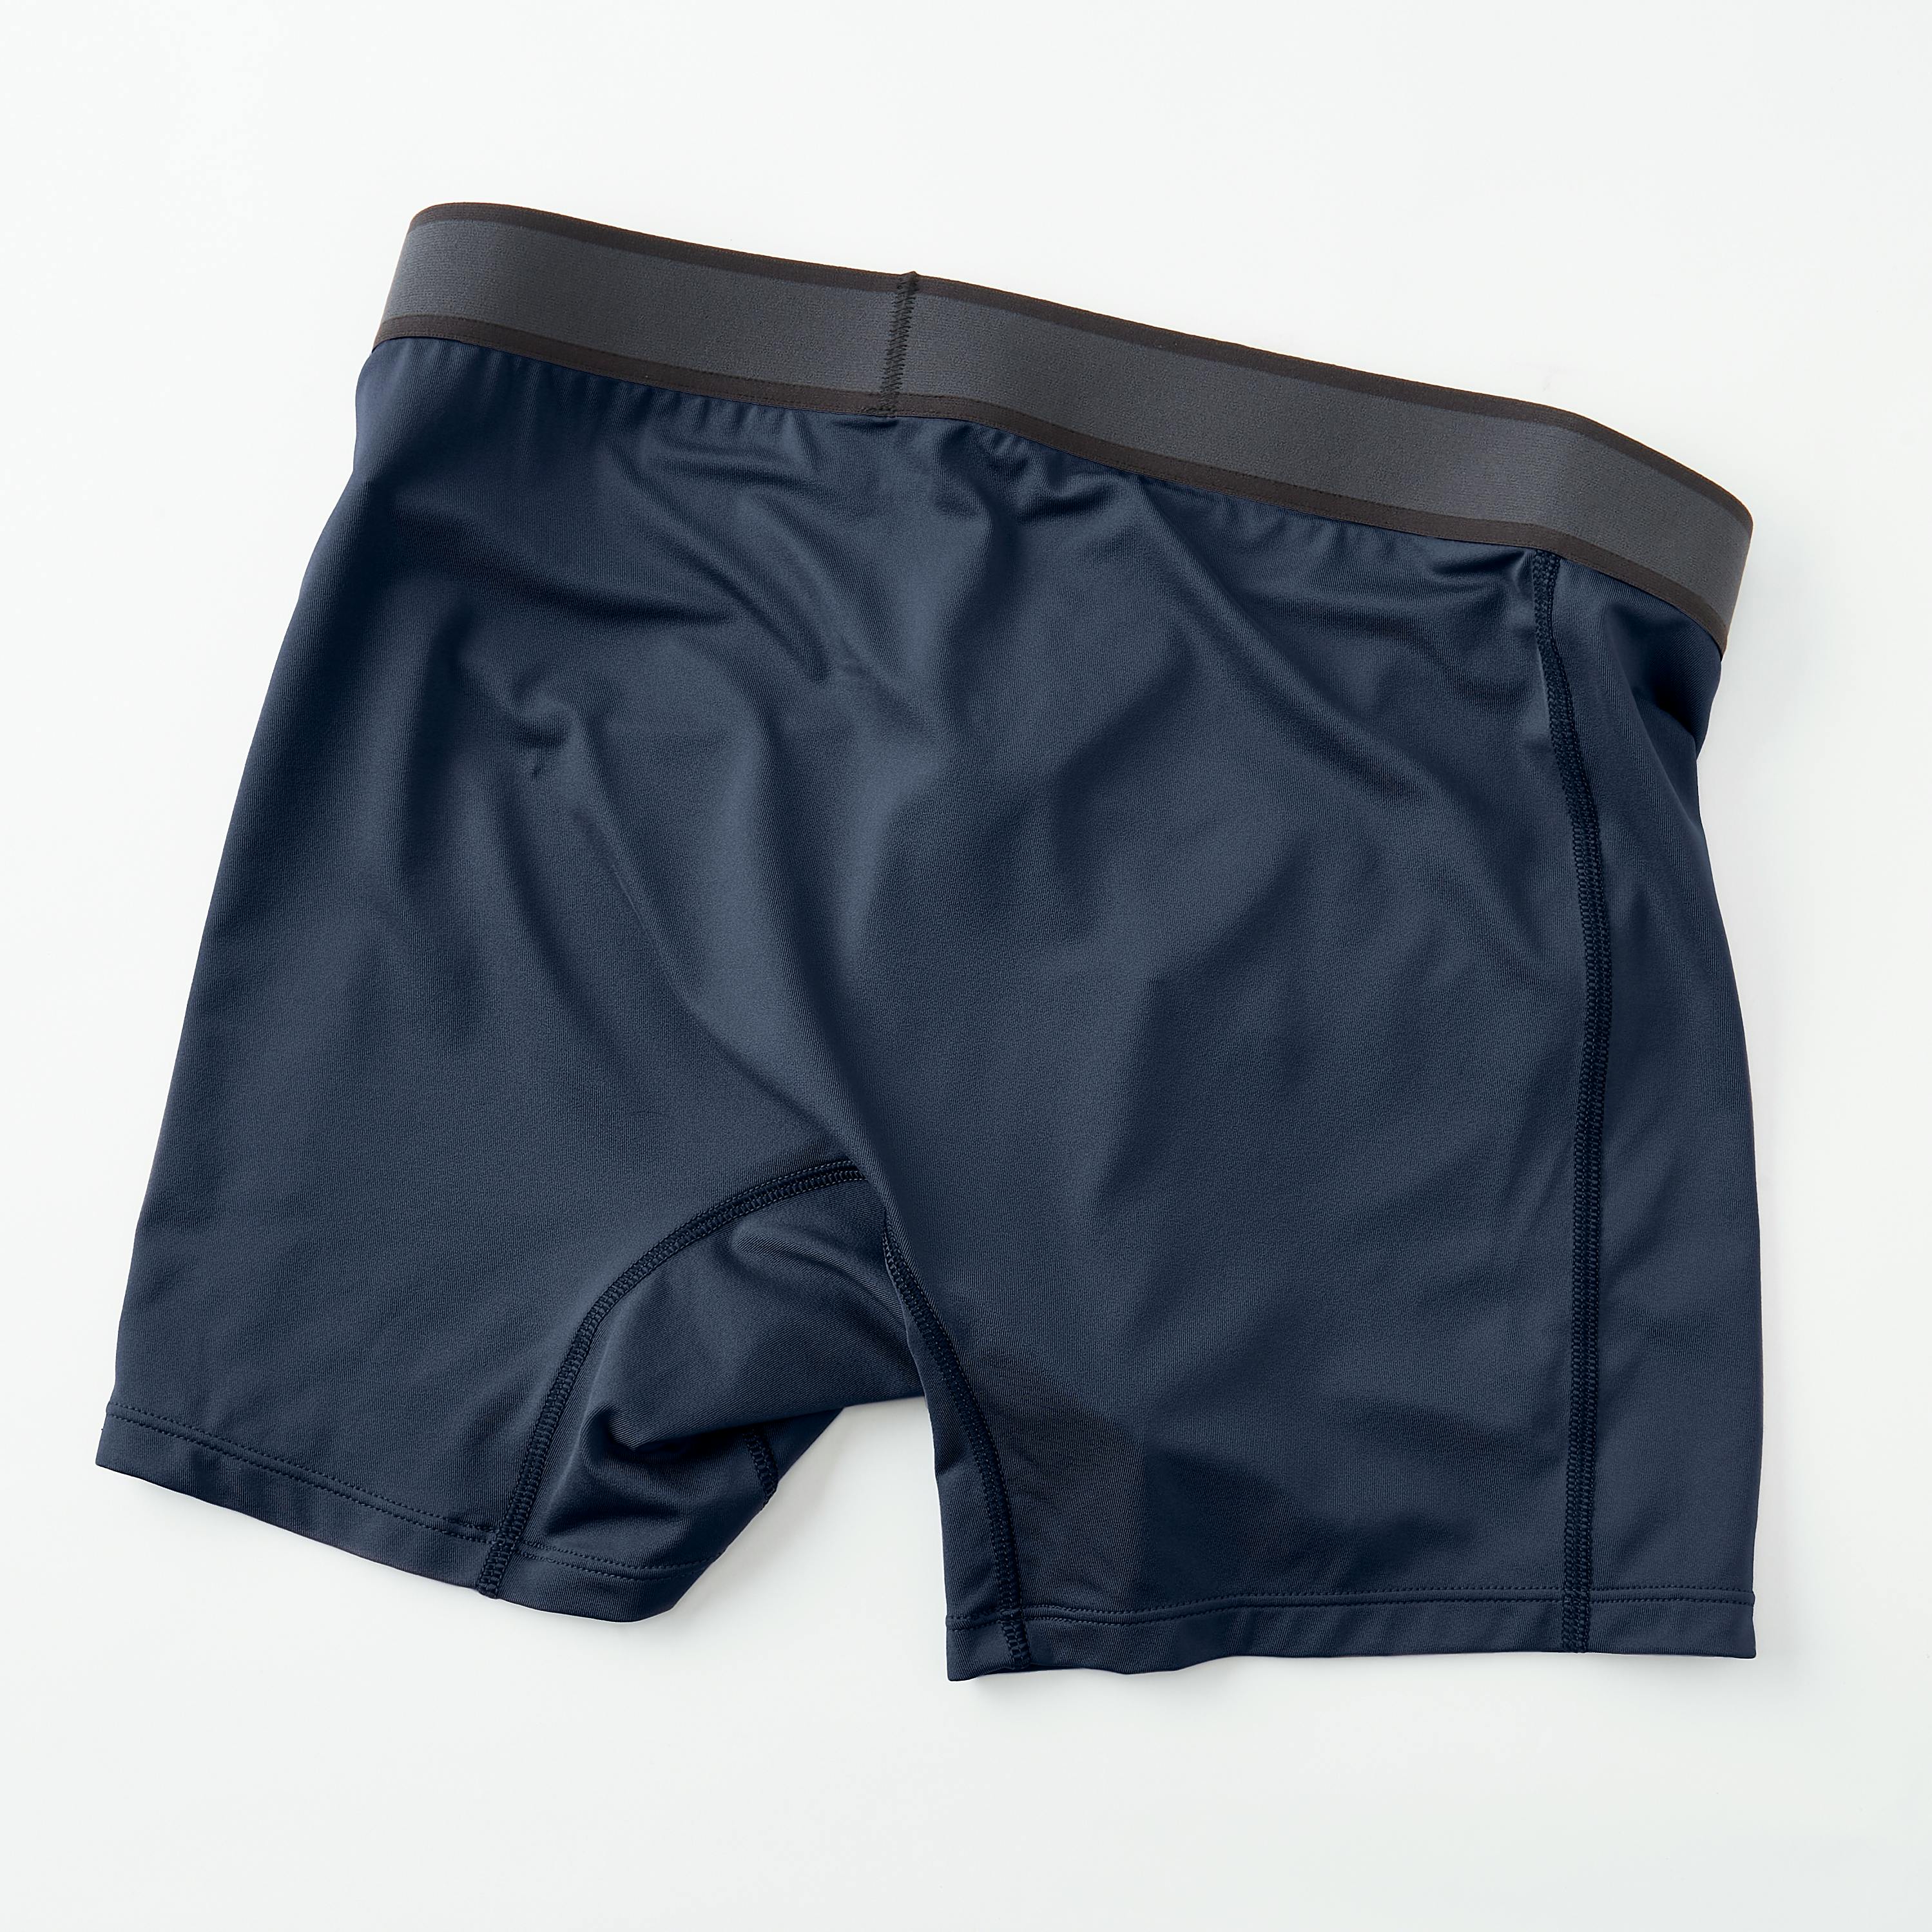 Proof Performance Boxer Brief